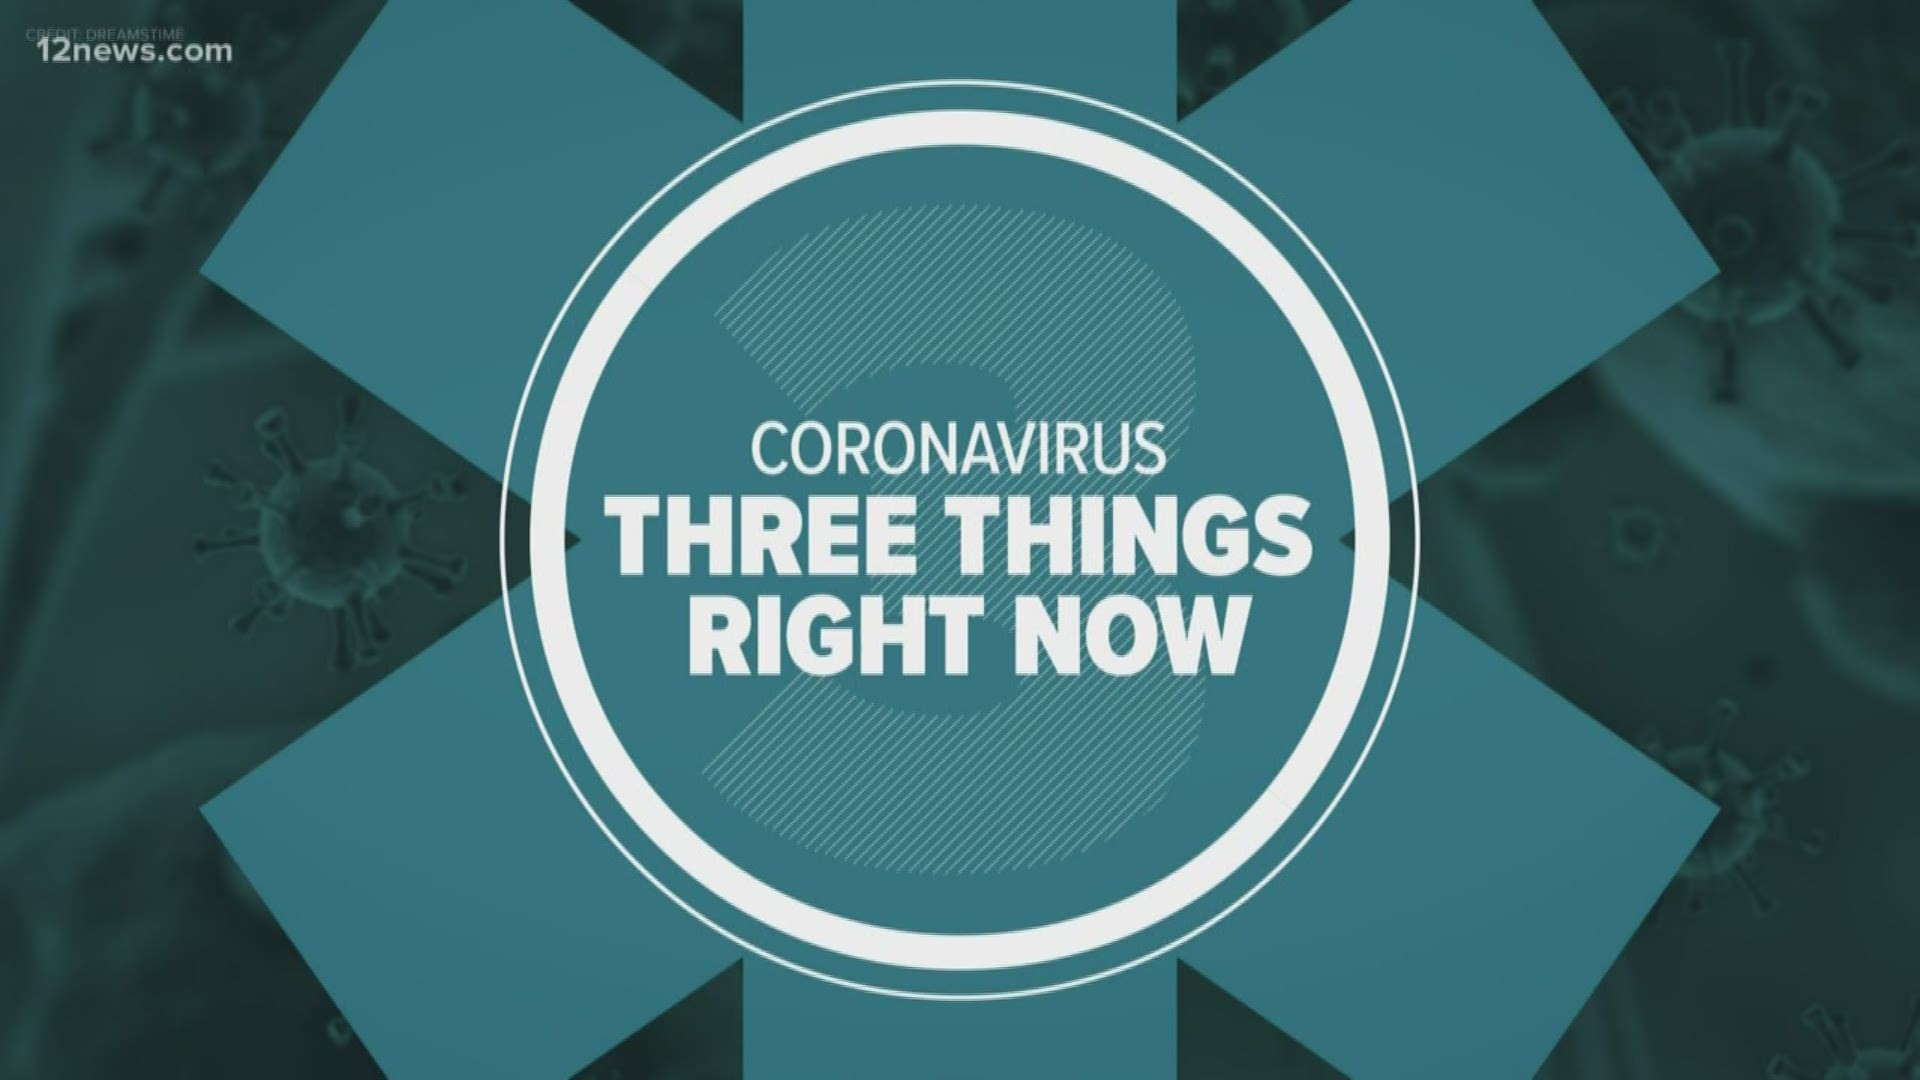 Here are some of the top coronavirus headlines for April 30, 2020. Tram Mai has the latest.